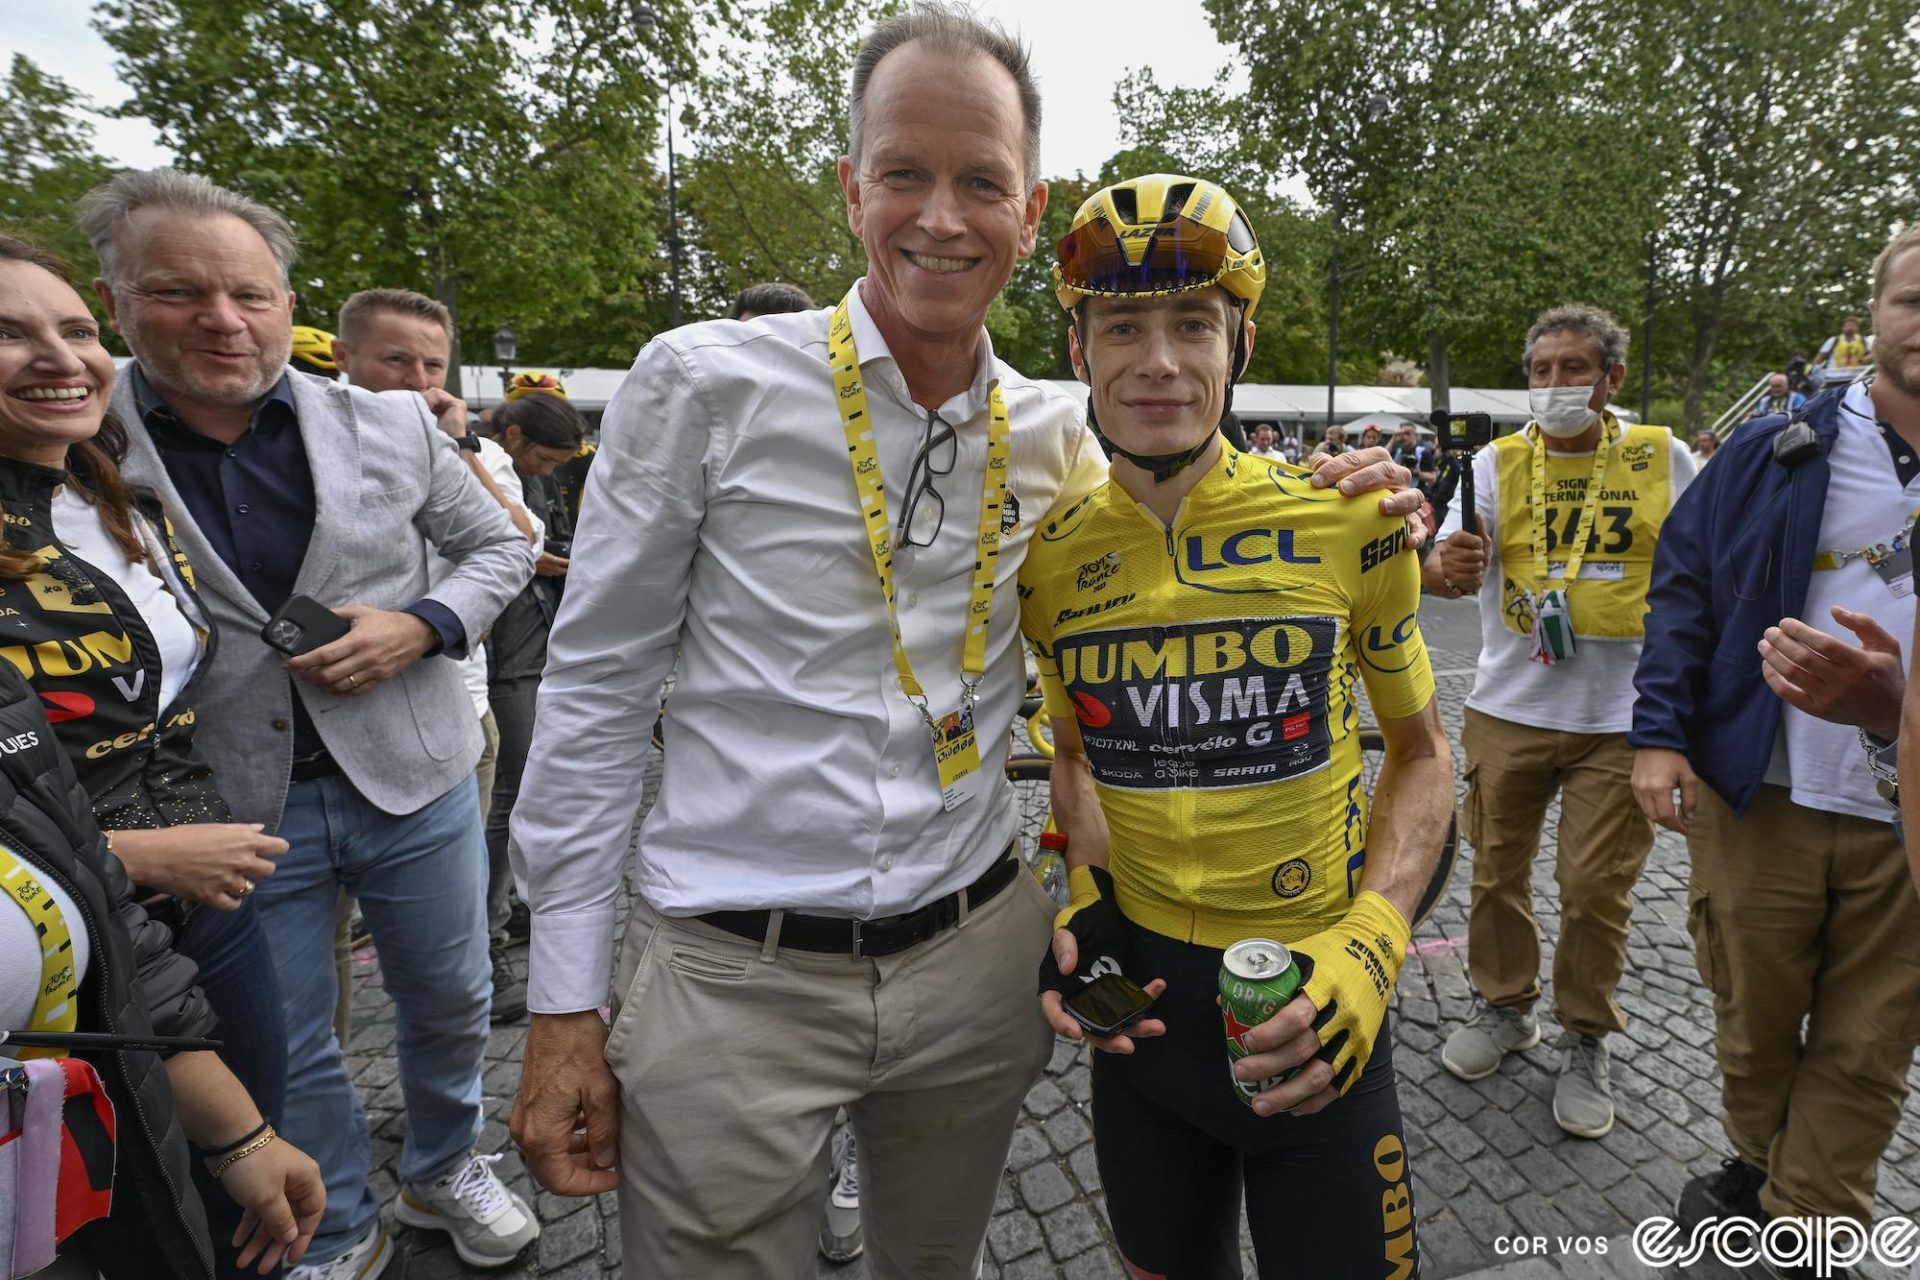 Jumbo-Visma general manager Richard Plugge stands with his arm around Jonas Vingegaard at the finish of the 2023 Tour de France in Paris. Vingegaard is still in team kit, including the yellow jersey of race winner, while Plugge is wearing the unremarkable outfit of khaki pants and a white long-sleeve button down shirt. Both are smiling, Plugge a bit more widely than Vingegaard.